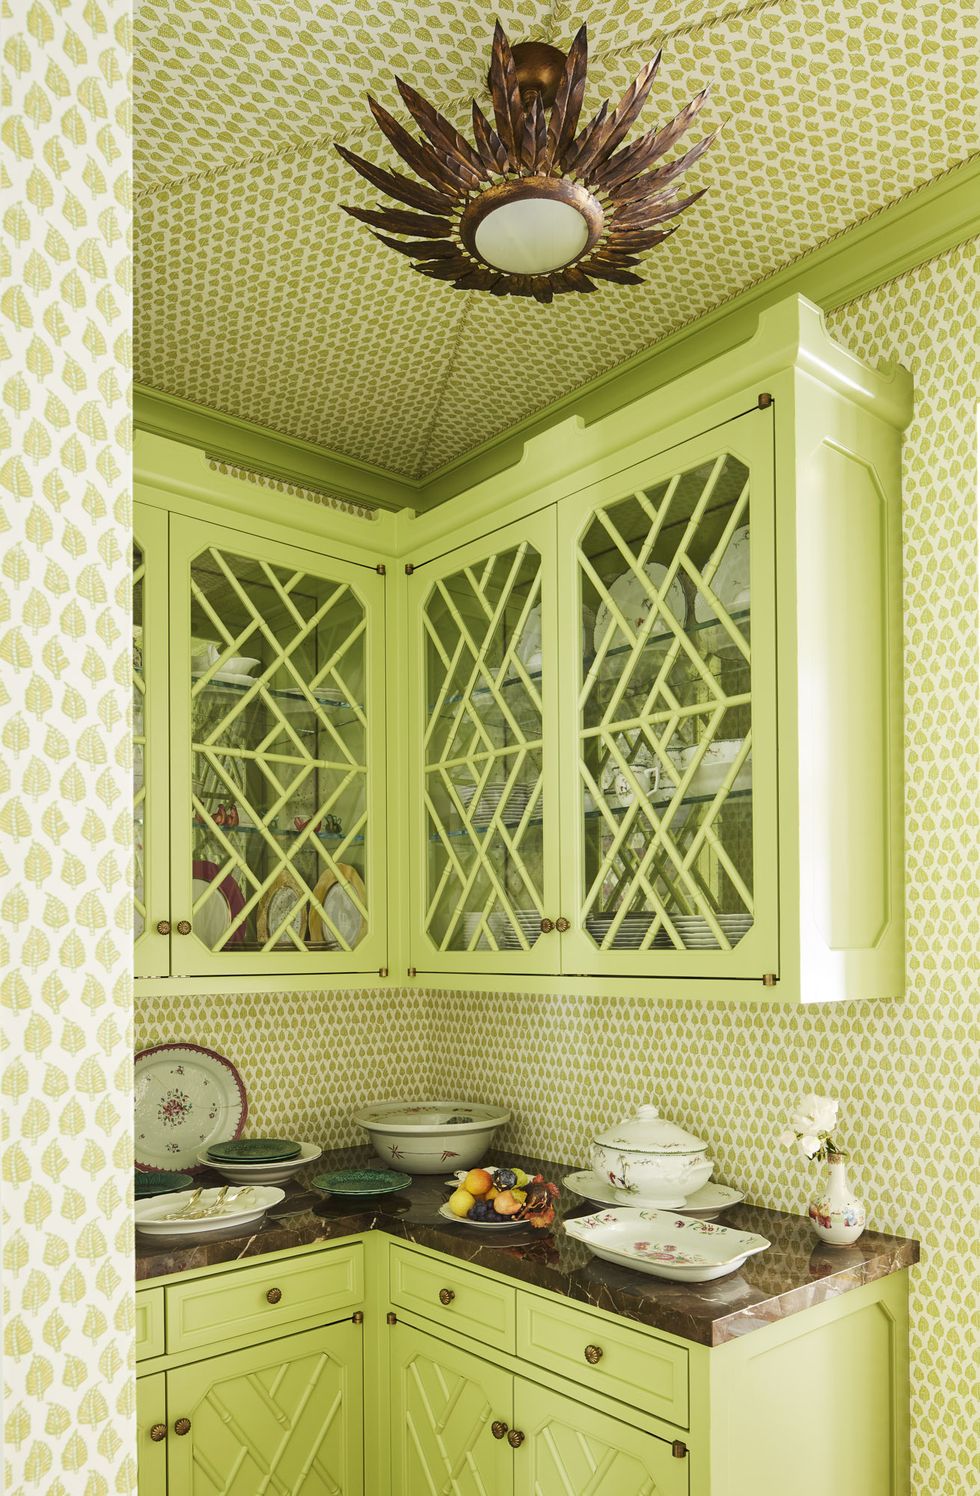 Green Apple Kitchen Decor and Color Inspiration